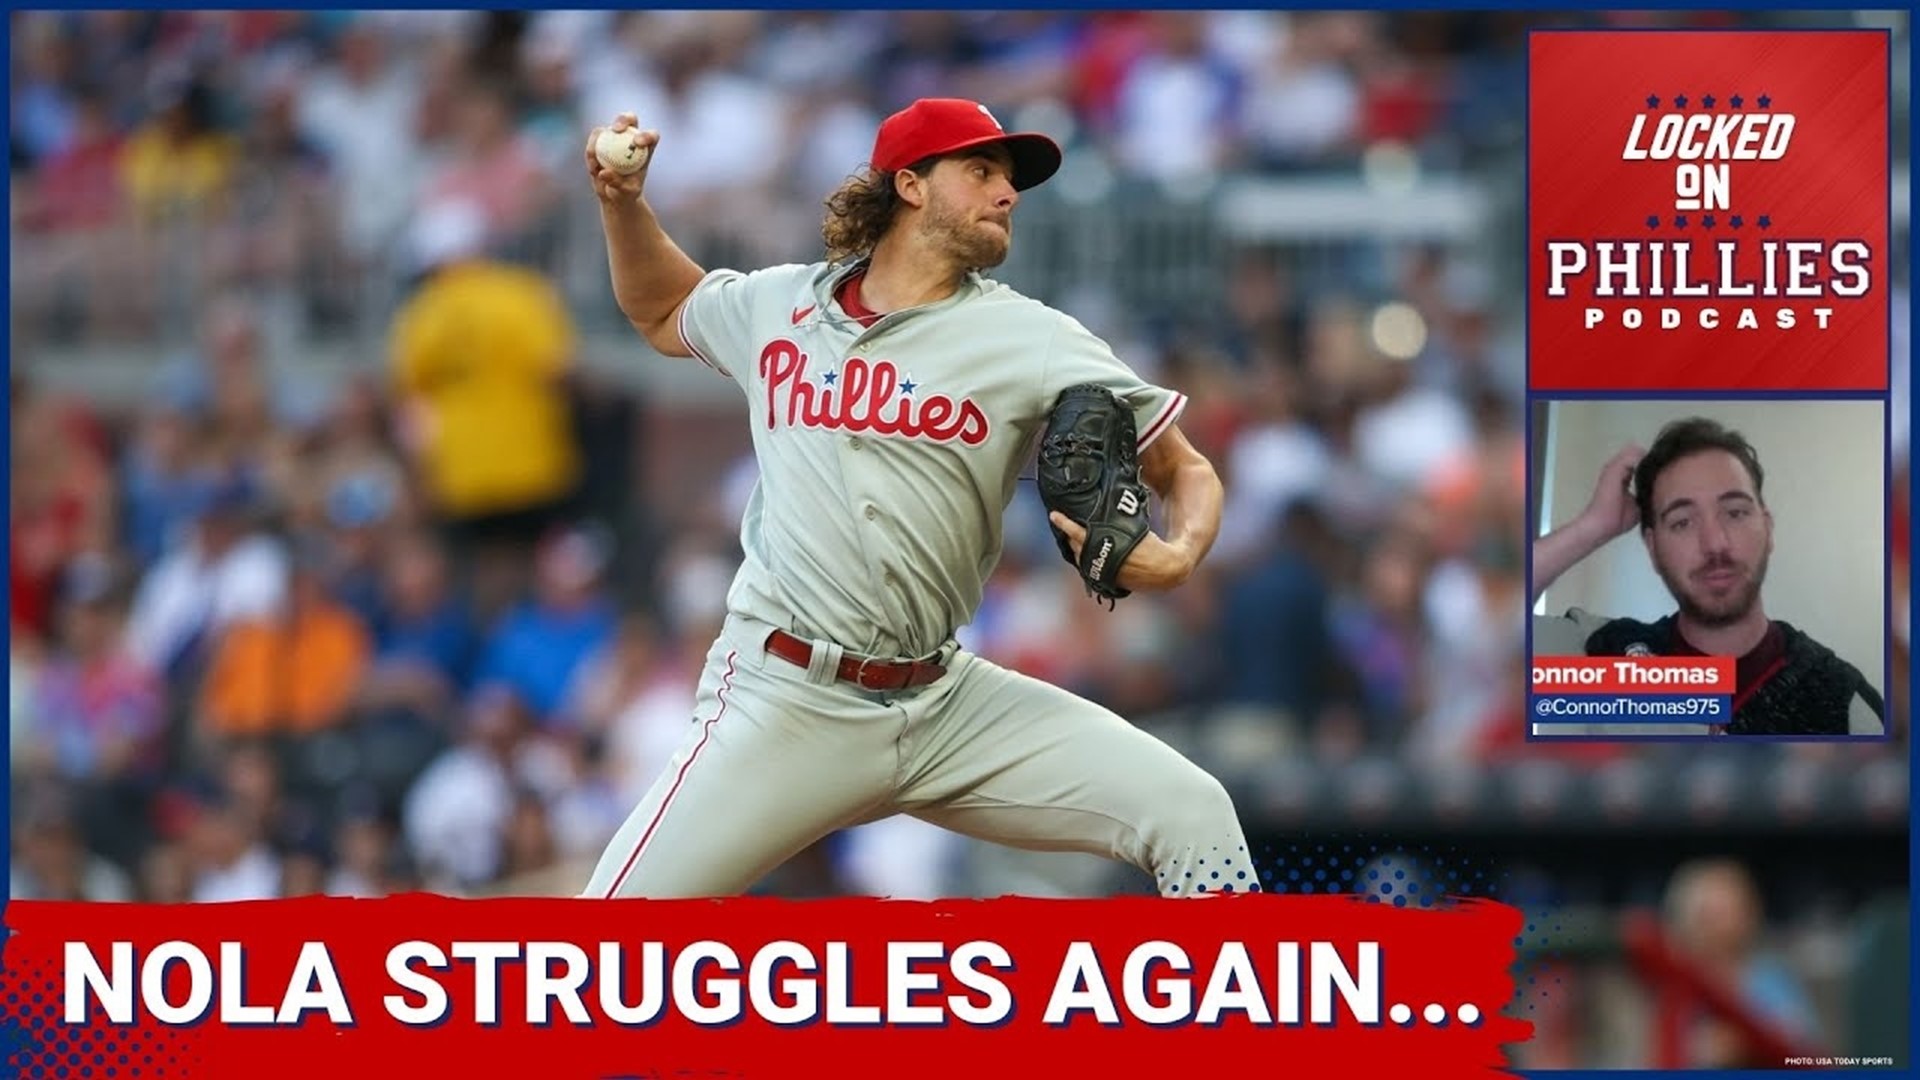 In today's episode, Connor discusses a very rough outing from Aaron Nola despite the Philadelphia Phillies' offense holding up their end of the bargain.